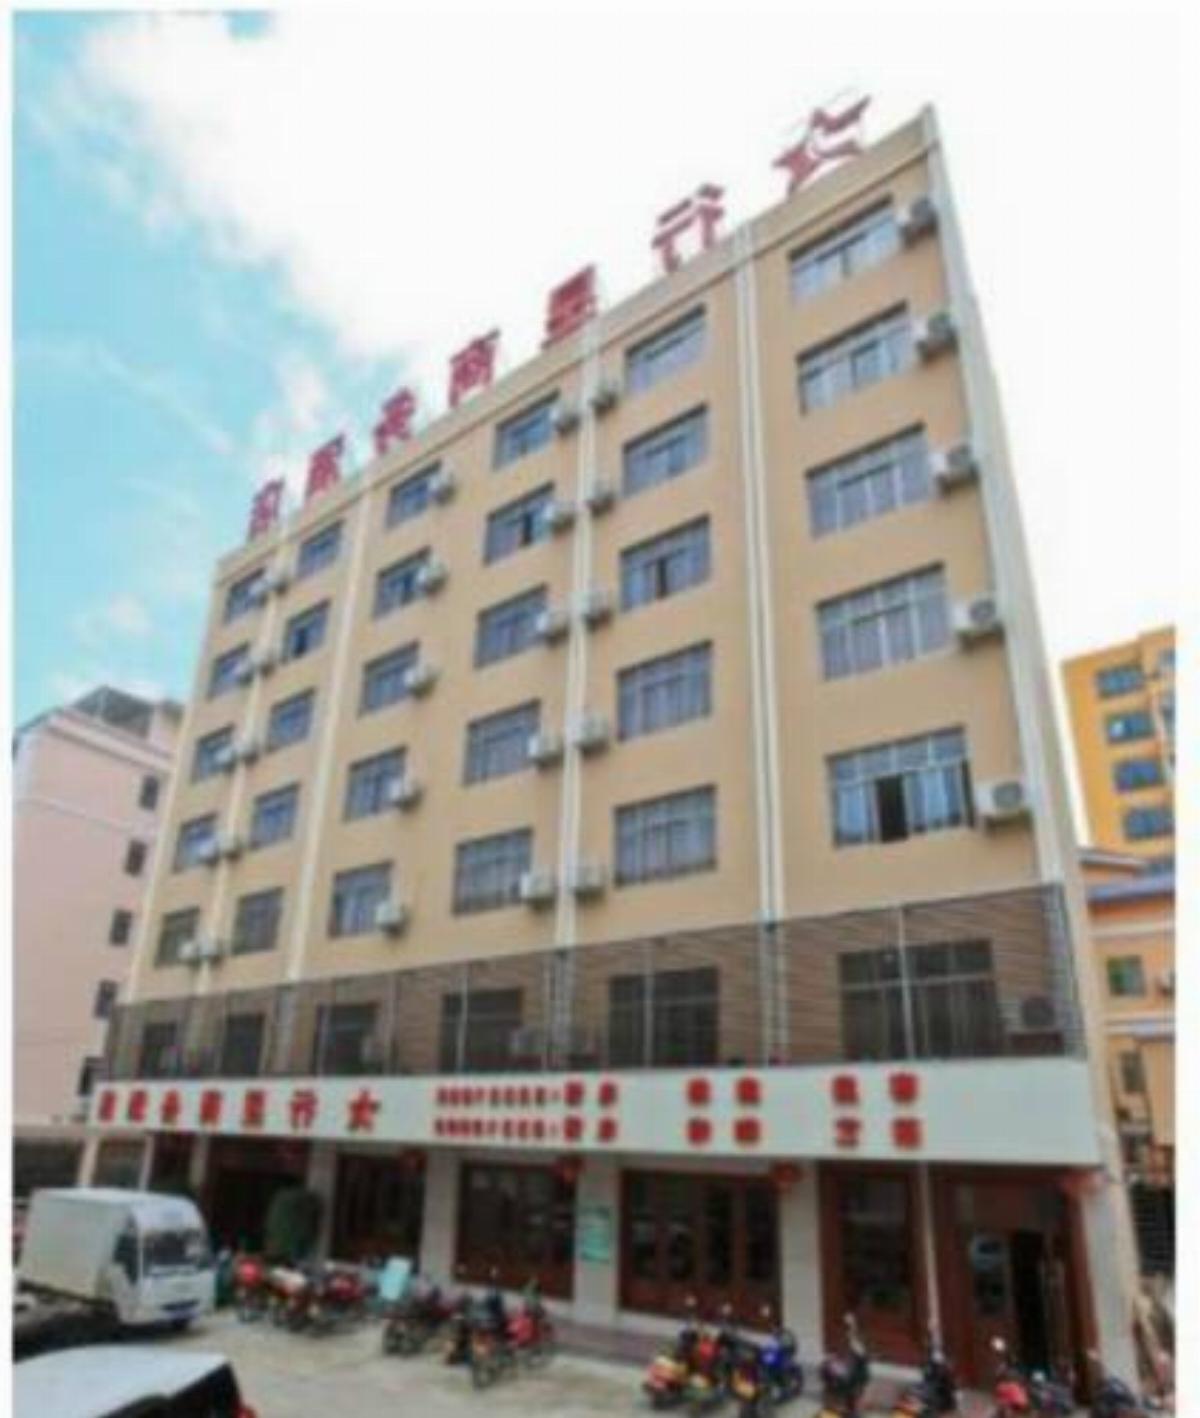 Planet Business Hotel Hotel Lingshui China